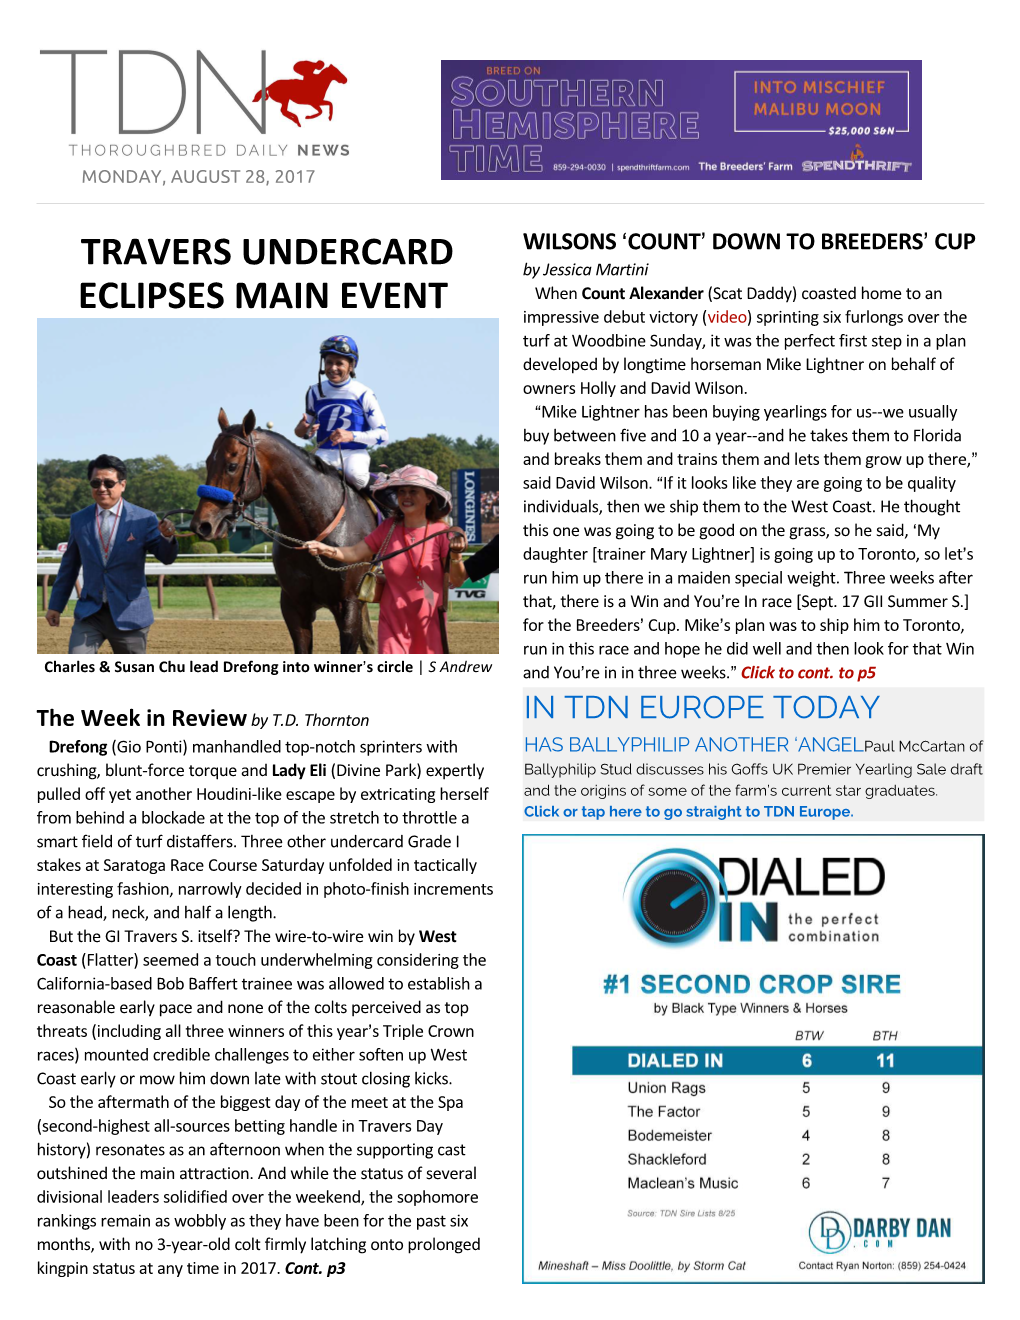 Travers Undercard Eclipses Main Event Yet the Inevitable Comparisons to Stablemate Arrogate Should Stop Beyond Establishing That Both Colts Were Late-Developing (Cont